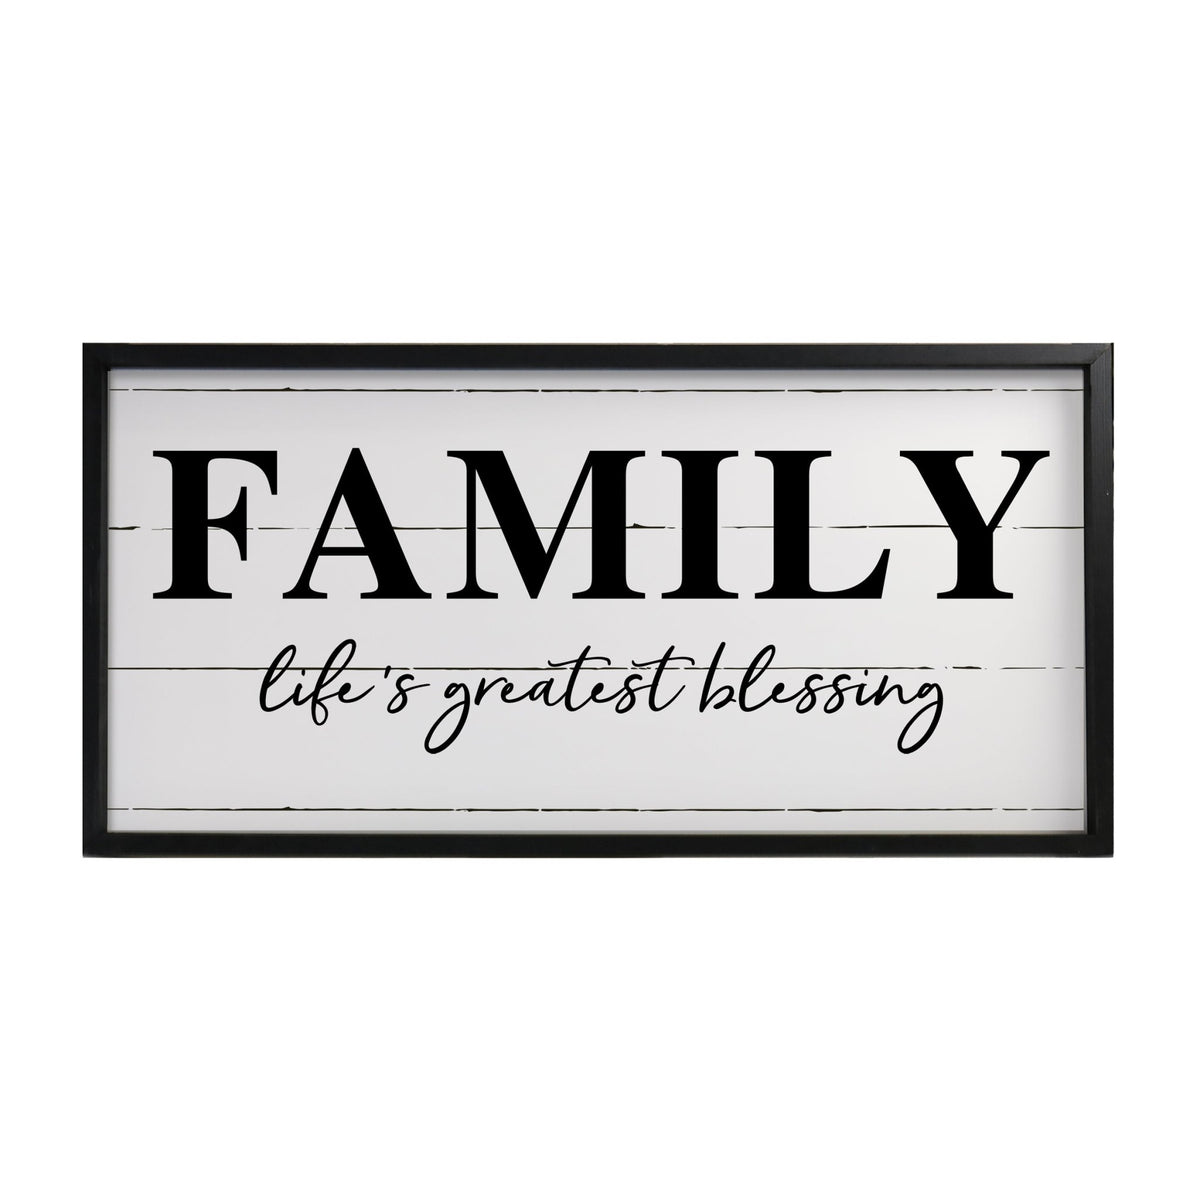 Large Family Wall Décor Quote Sign For Home Decoration 18 x 36 - Family Life - LifeSong Milestones